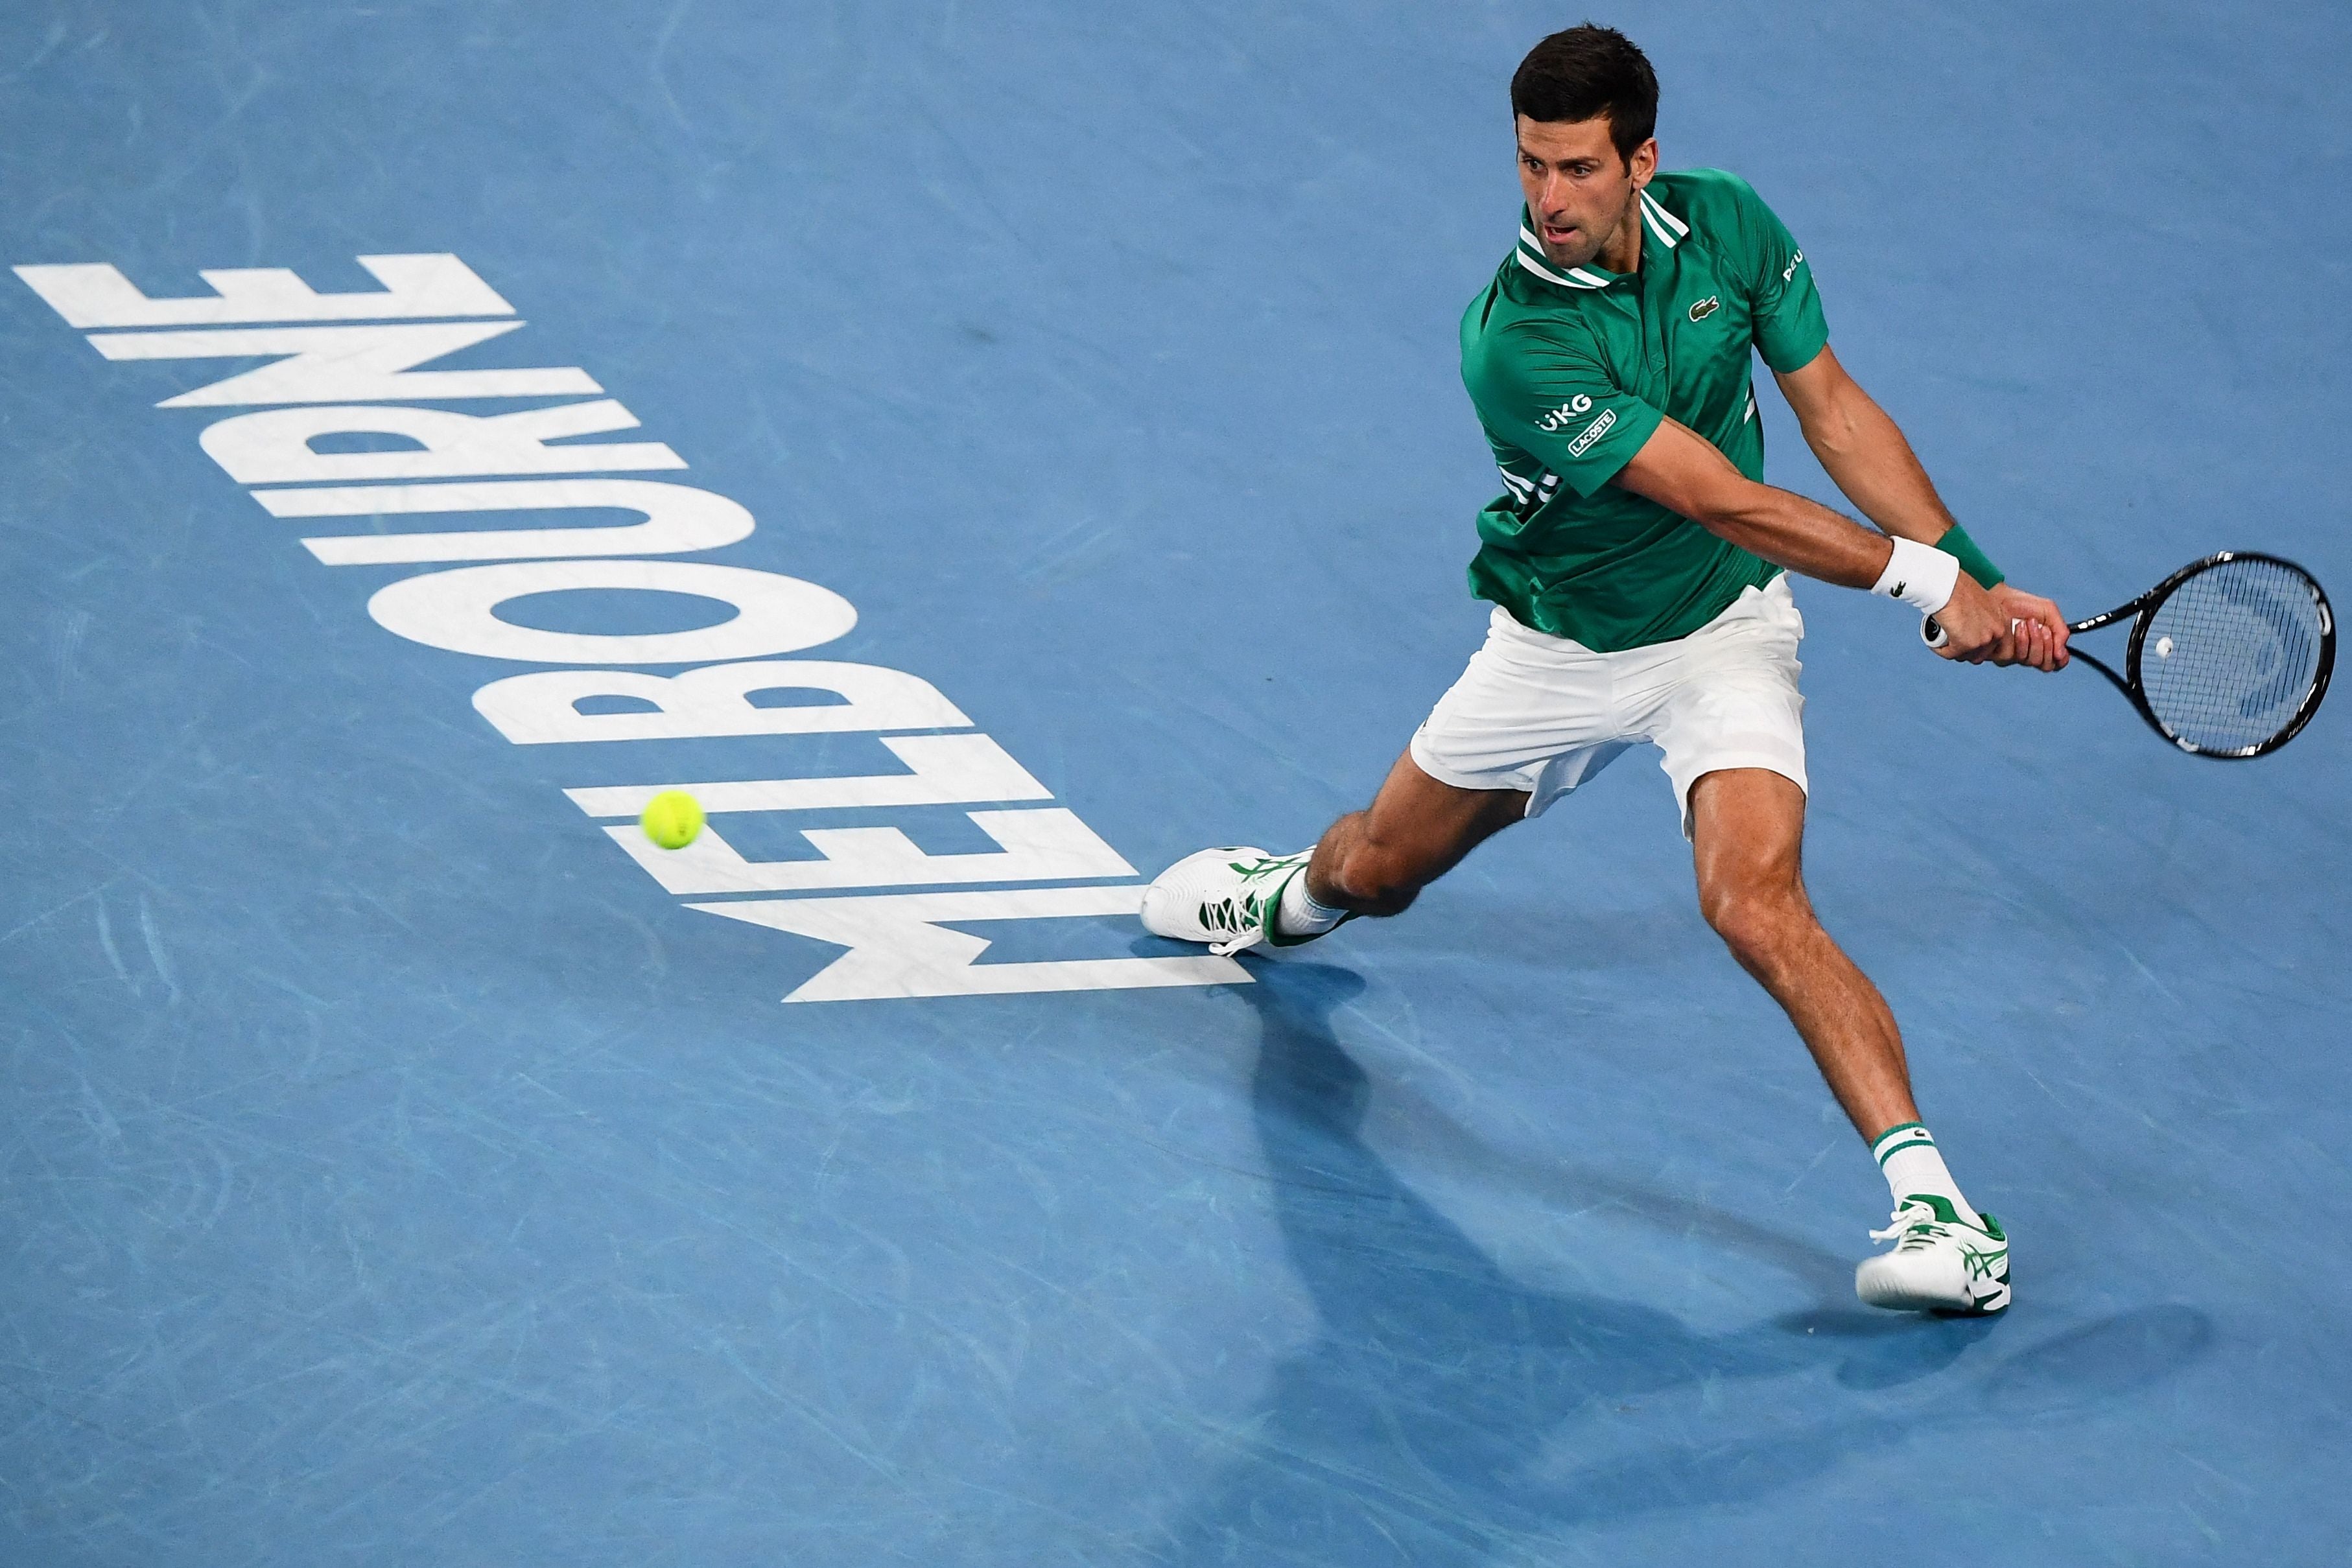 Djokovic is stuck in immigration detention after arriving in Australia to play in the tennis open.